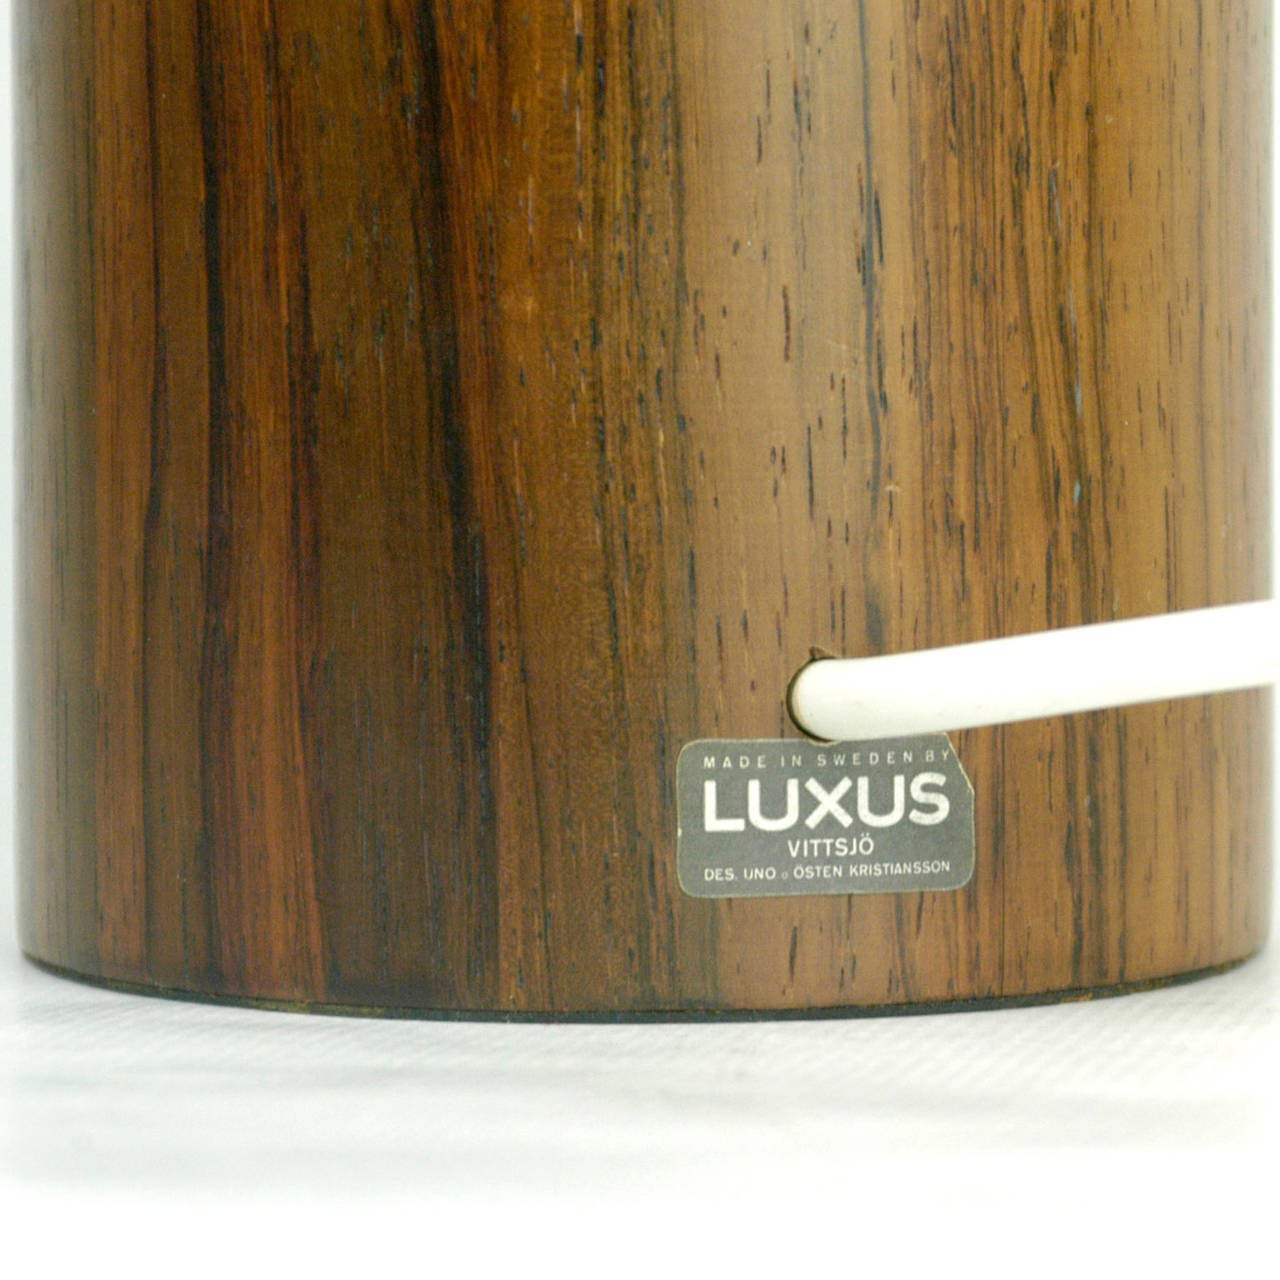 Plastic Scandinavian Modern Rosewood Table Lamp by U. and O. Kristiansson for Luxus